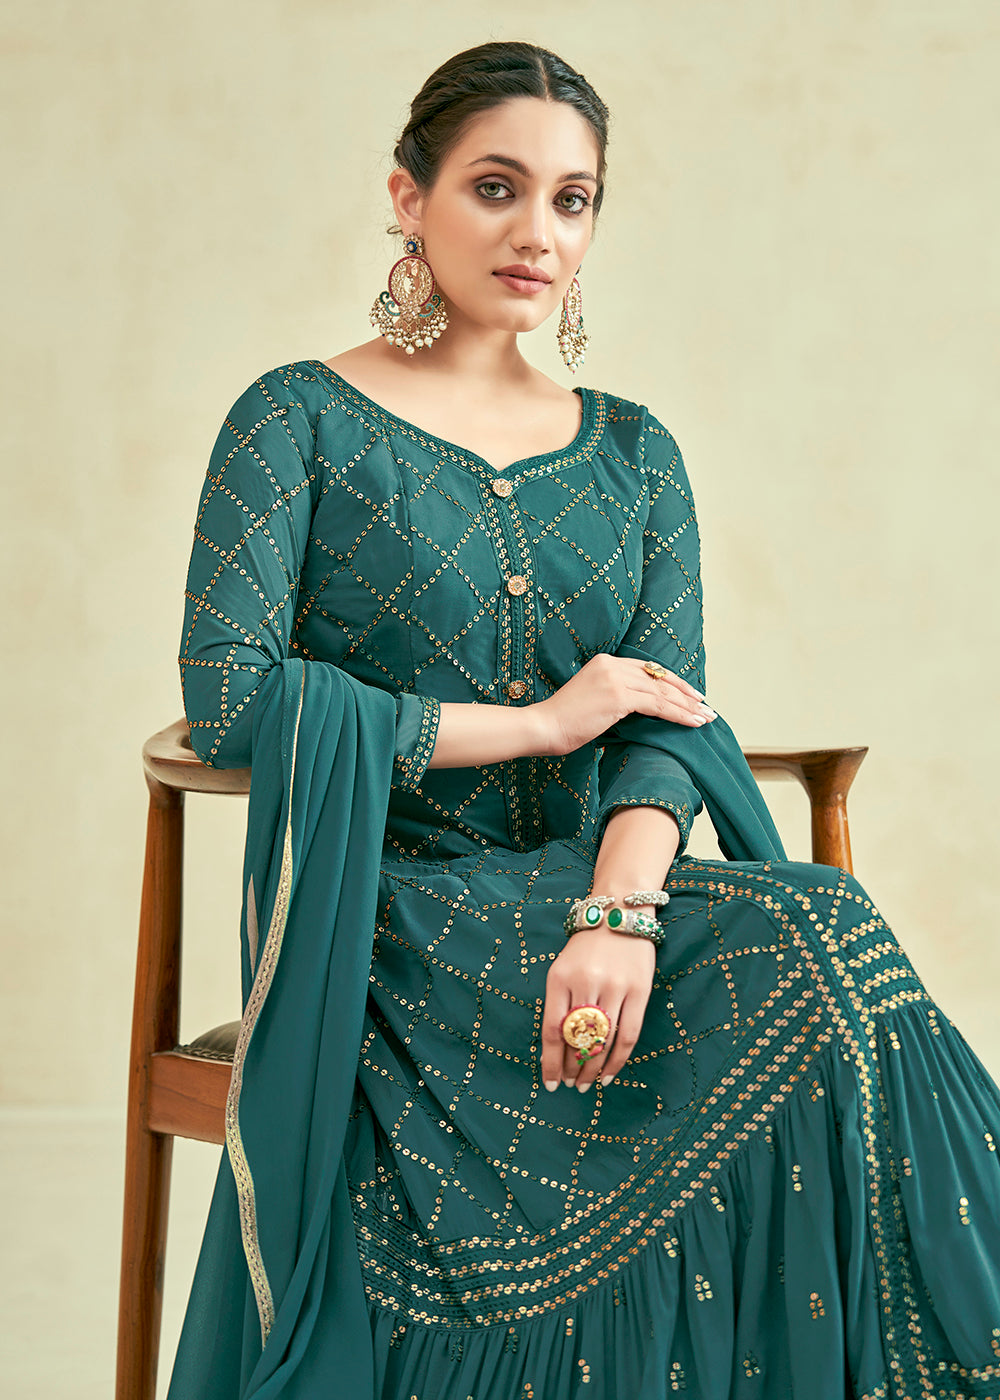 Buy Now Green Real Georgette with Sequins Wedding Festive Gown Online in USA, UK, Australia, Canada & Worldwide at Empress Clothing. 